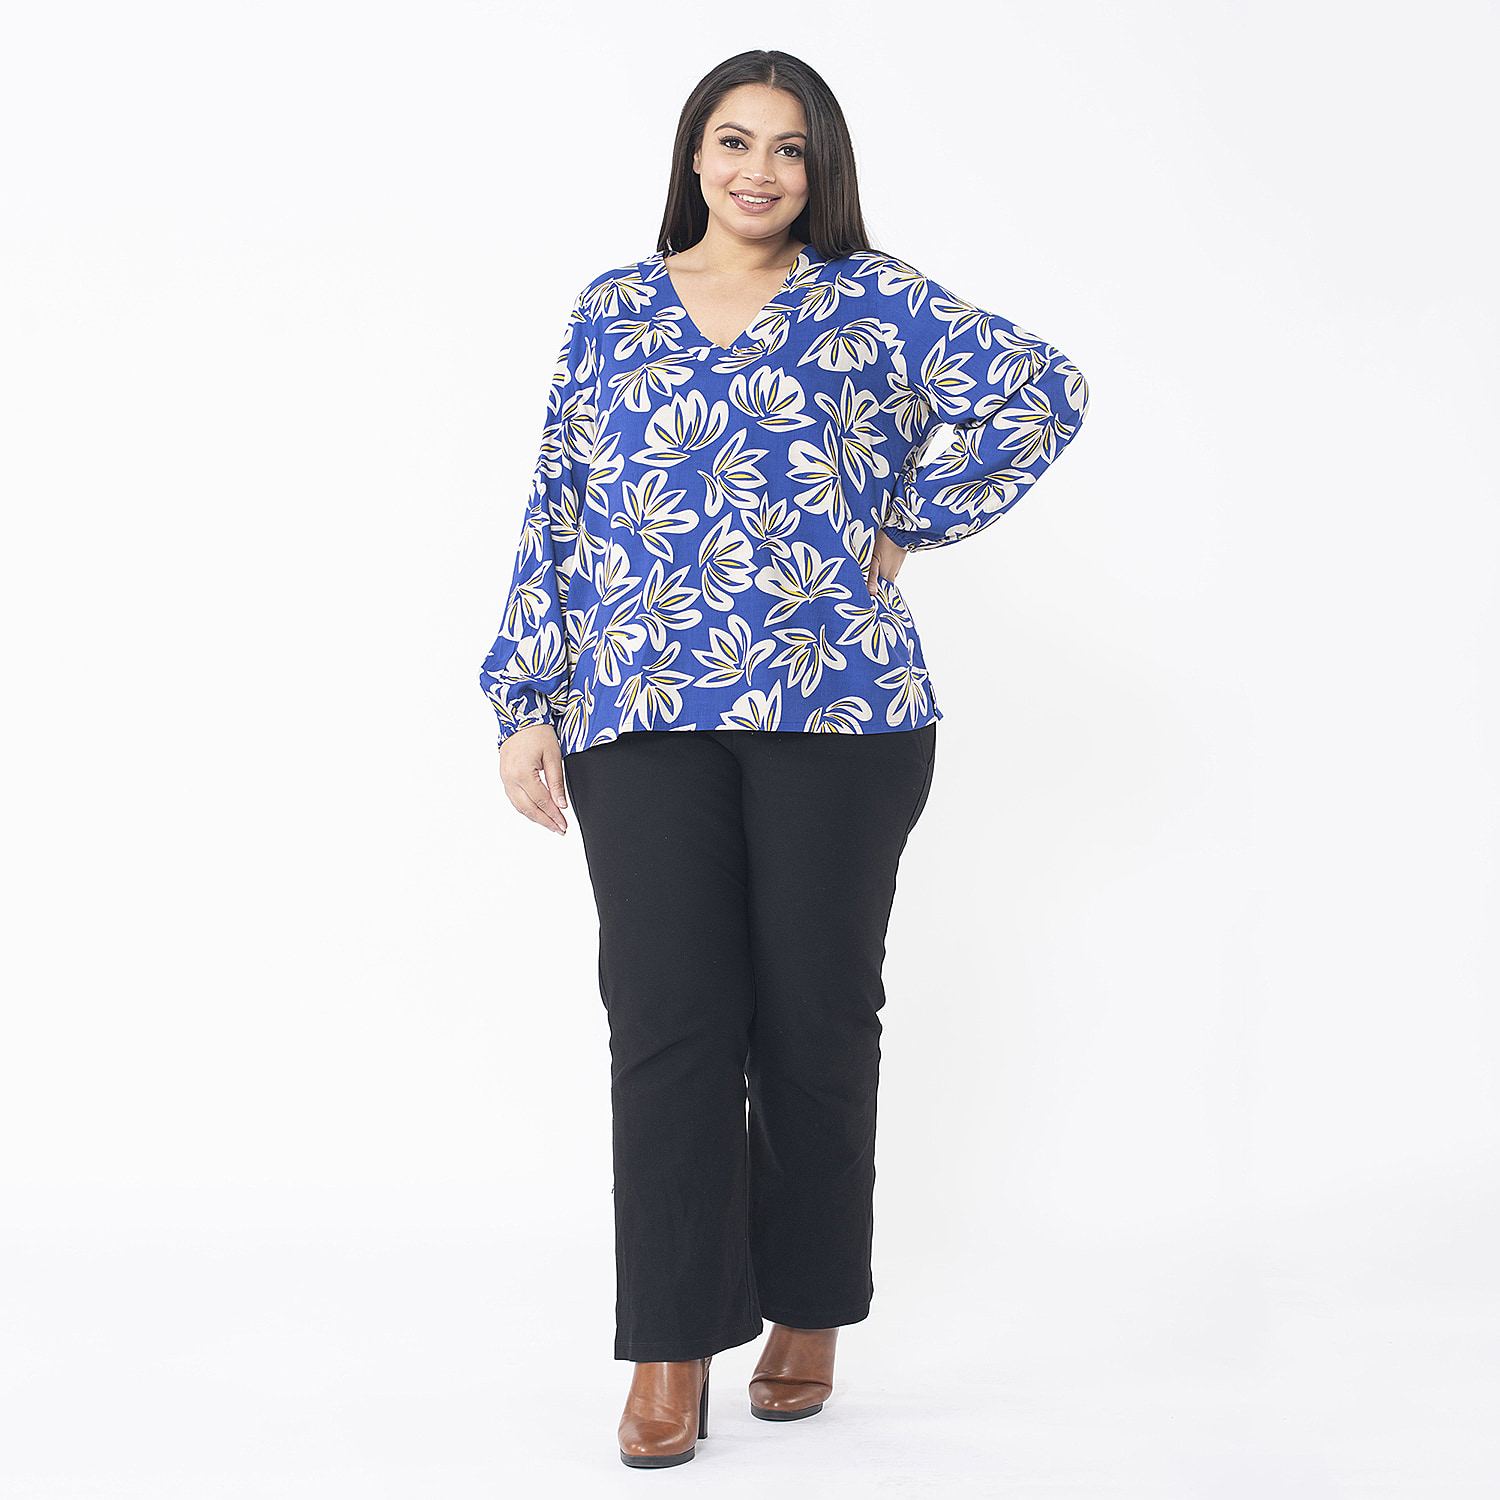 TAMSY 100% Viscose Floral Printed V Neck Full Sleeve Top with Elastic at Cuffs (Size L,16-18) - Navy